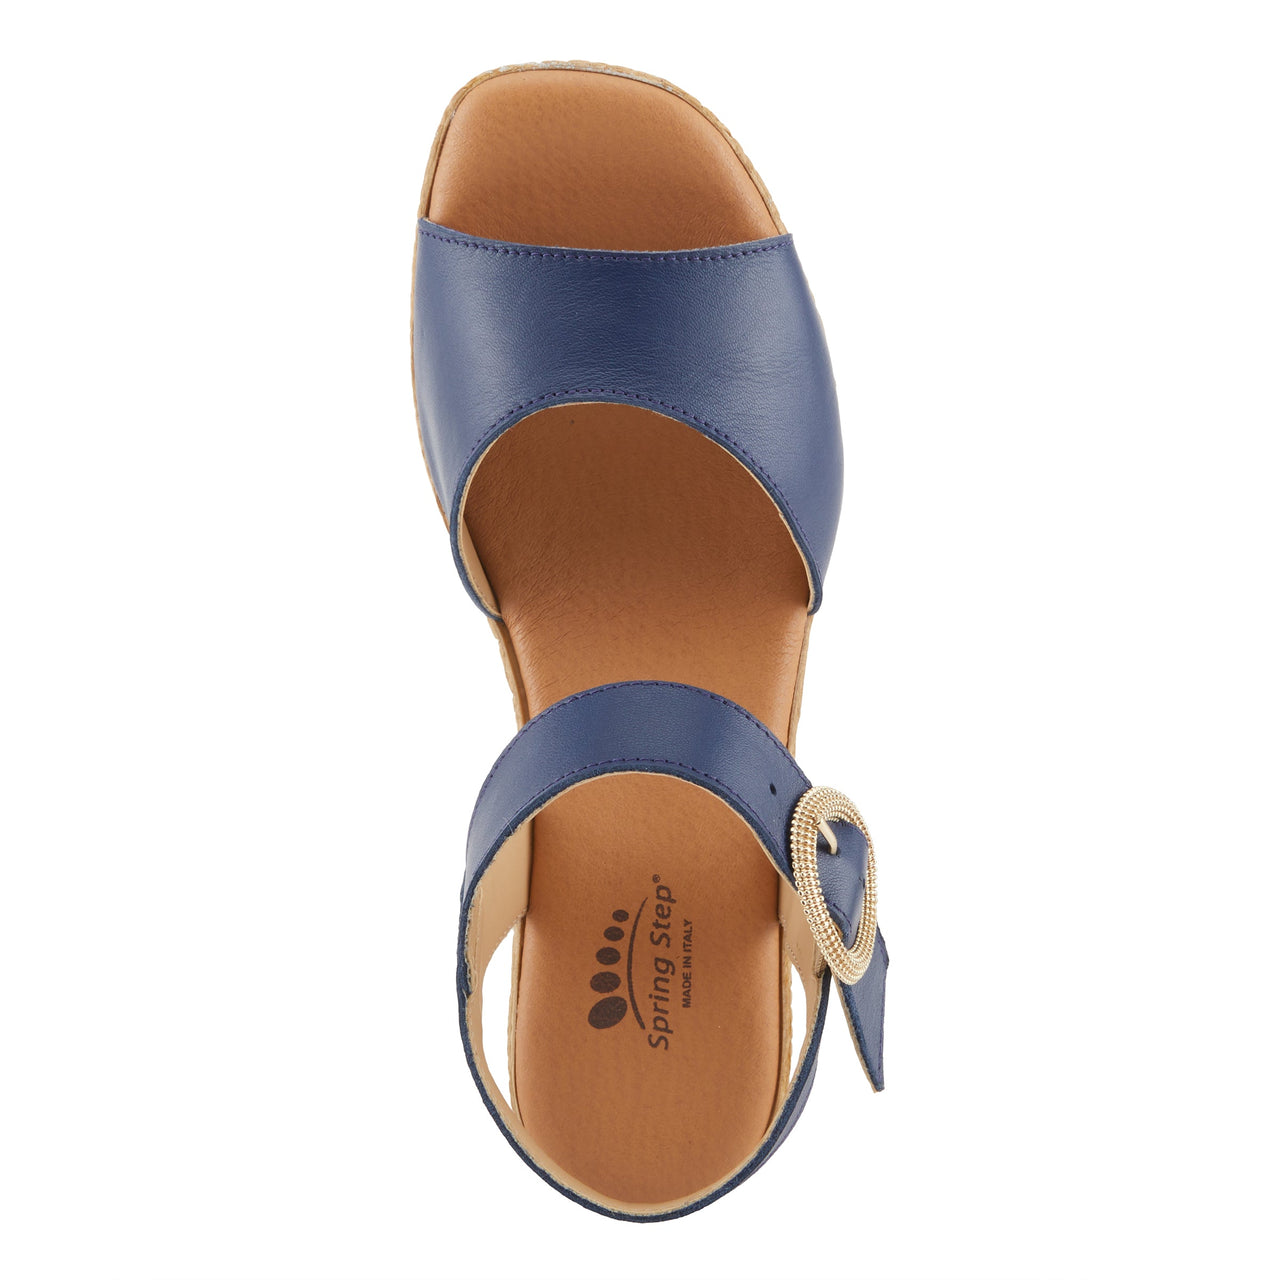 Leather Spring Step Isola Sandals with Cushioned Footbed and Adjustable Strap